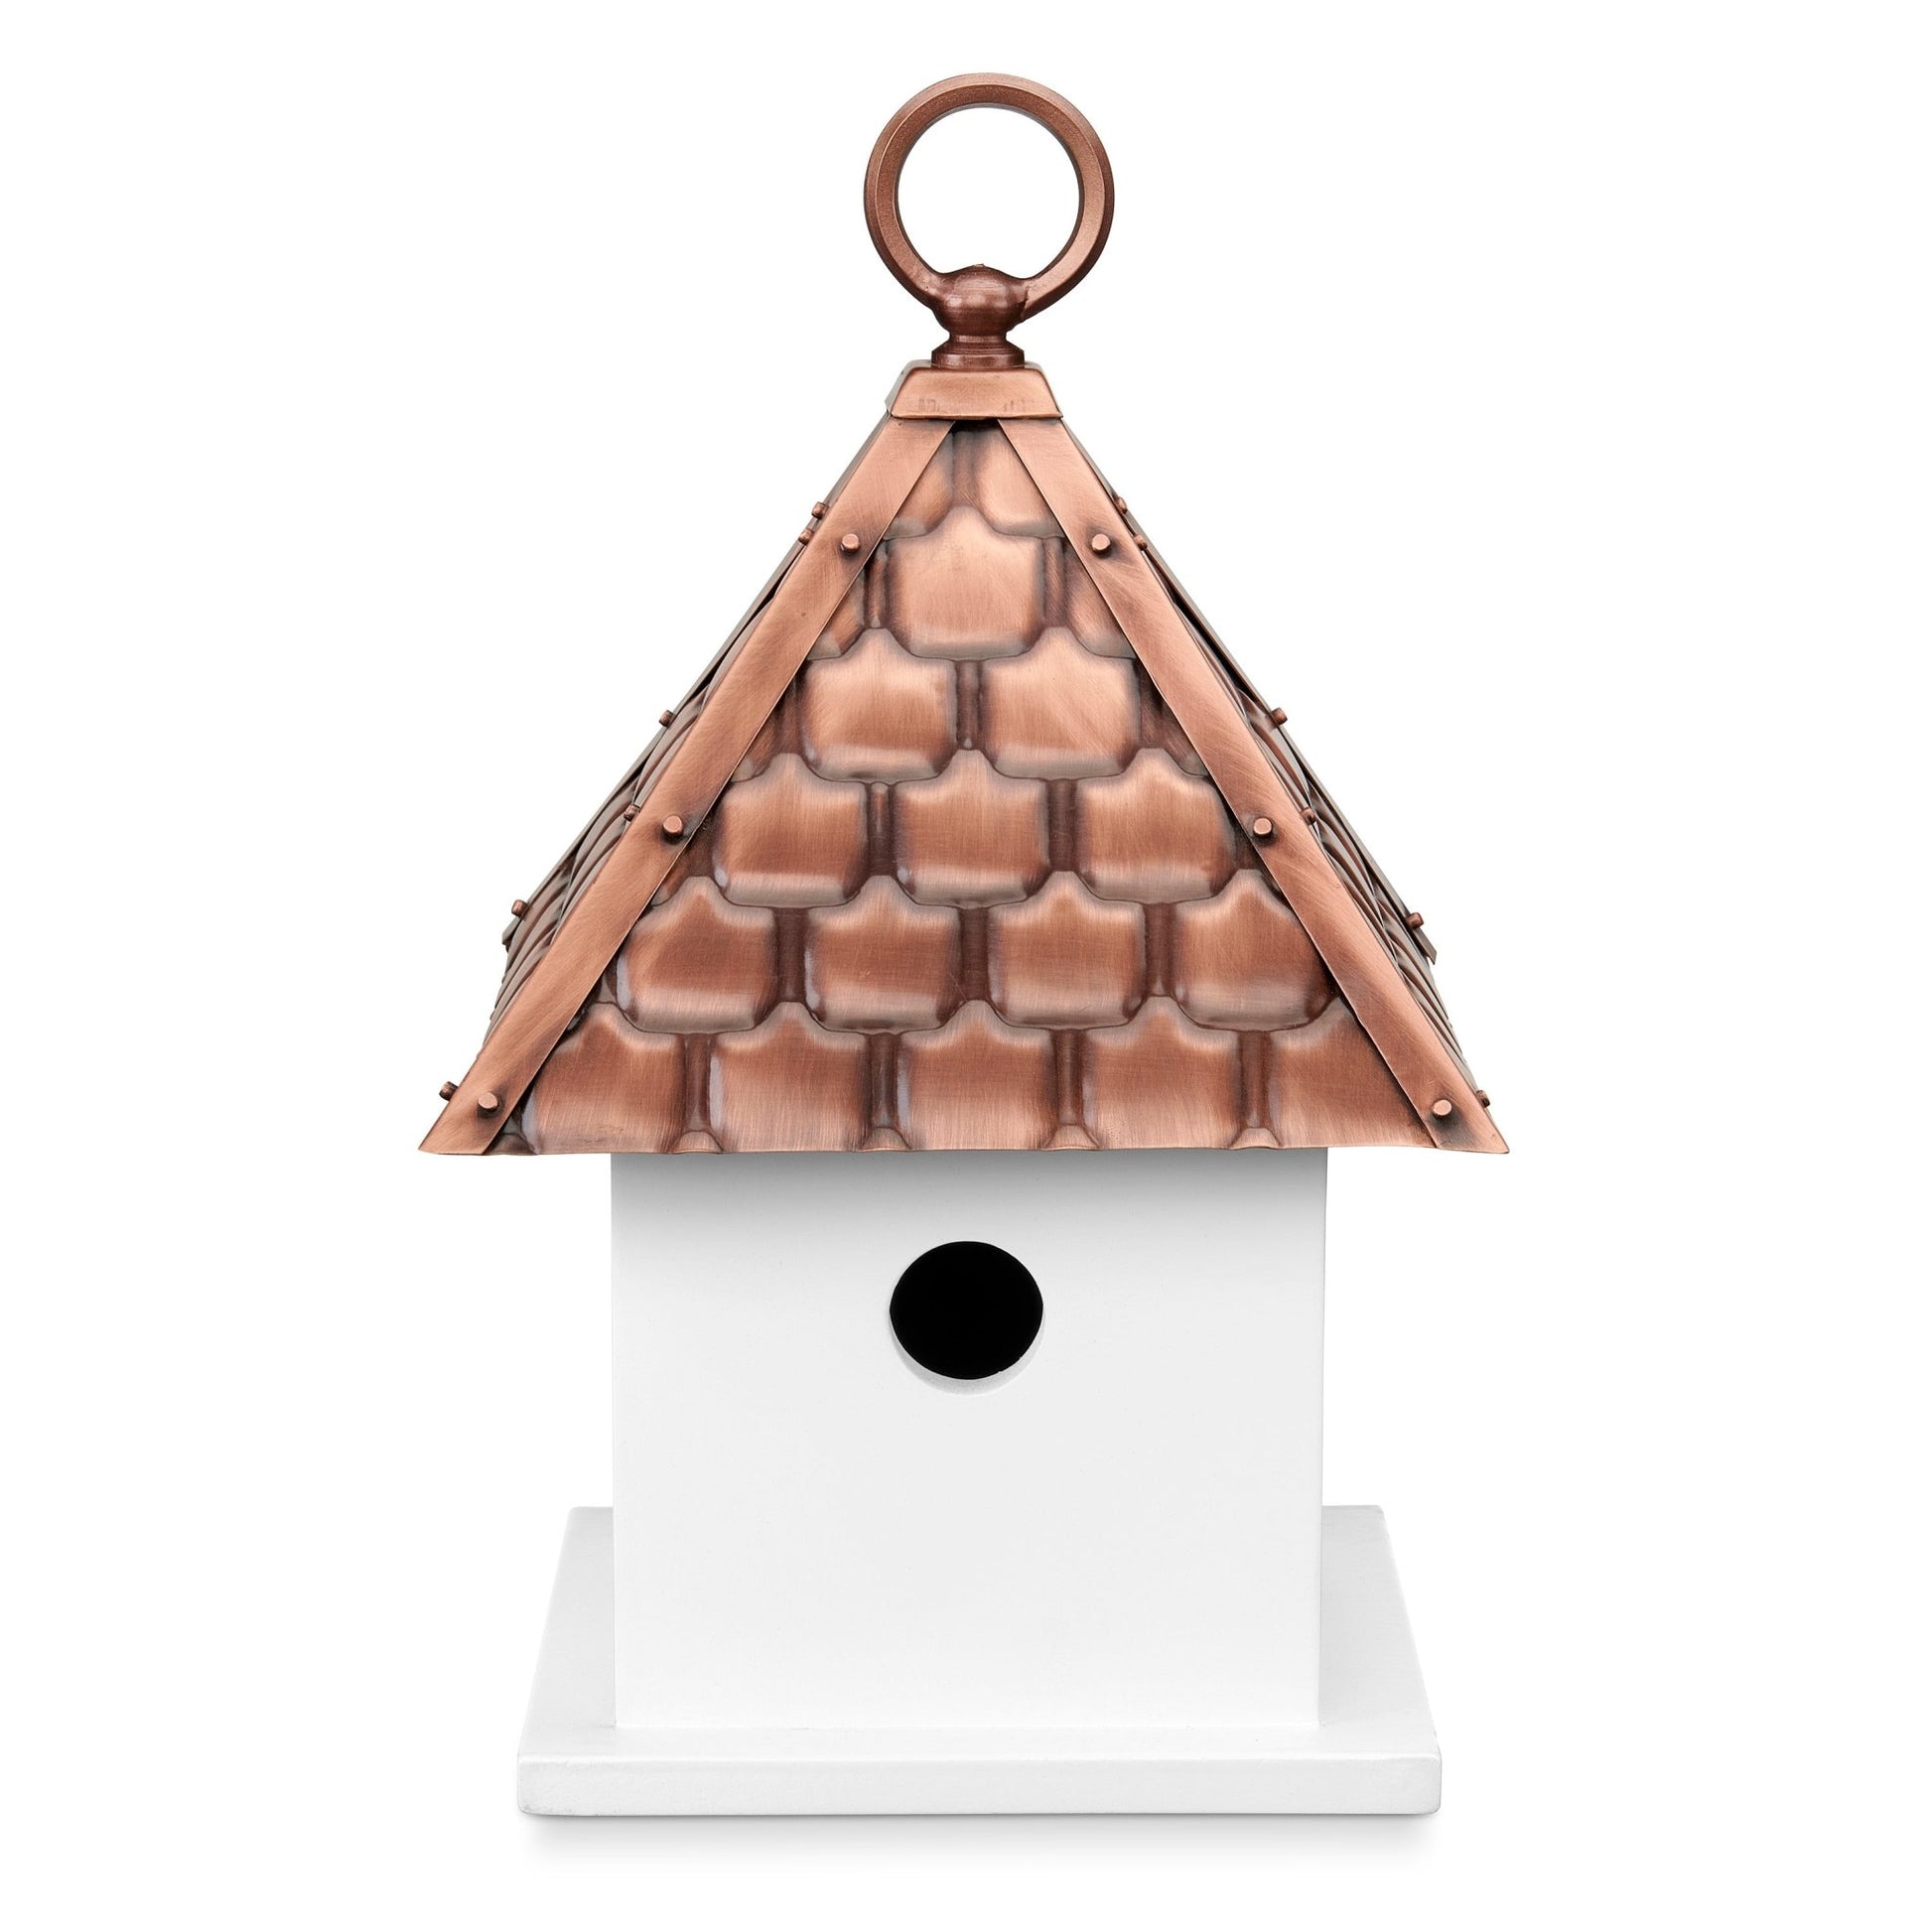 Bird House Bungalow – Shingled Antique Copper Roof - Good Directions